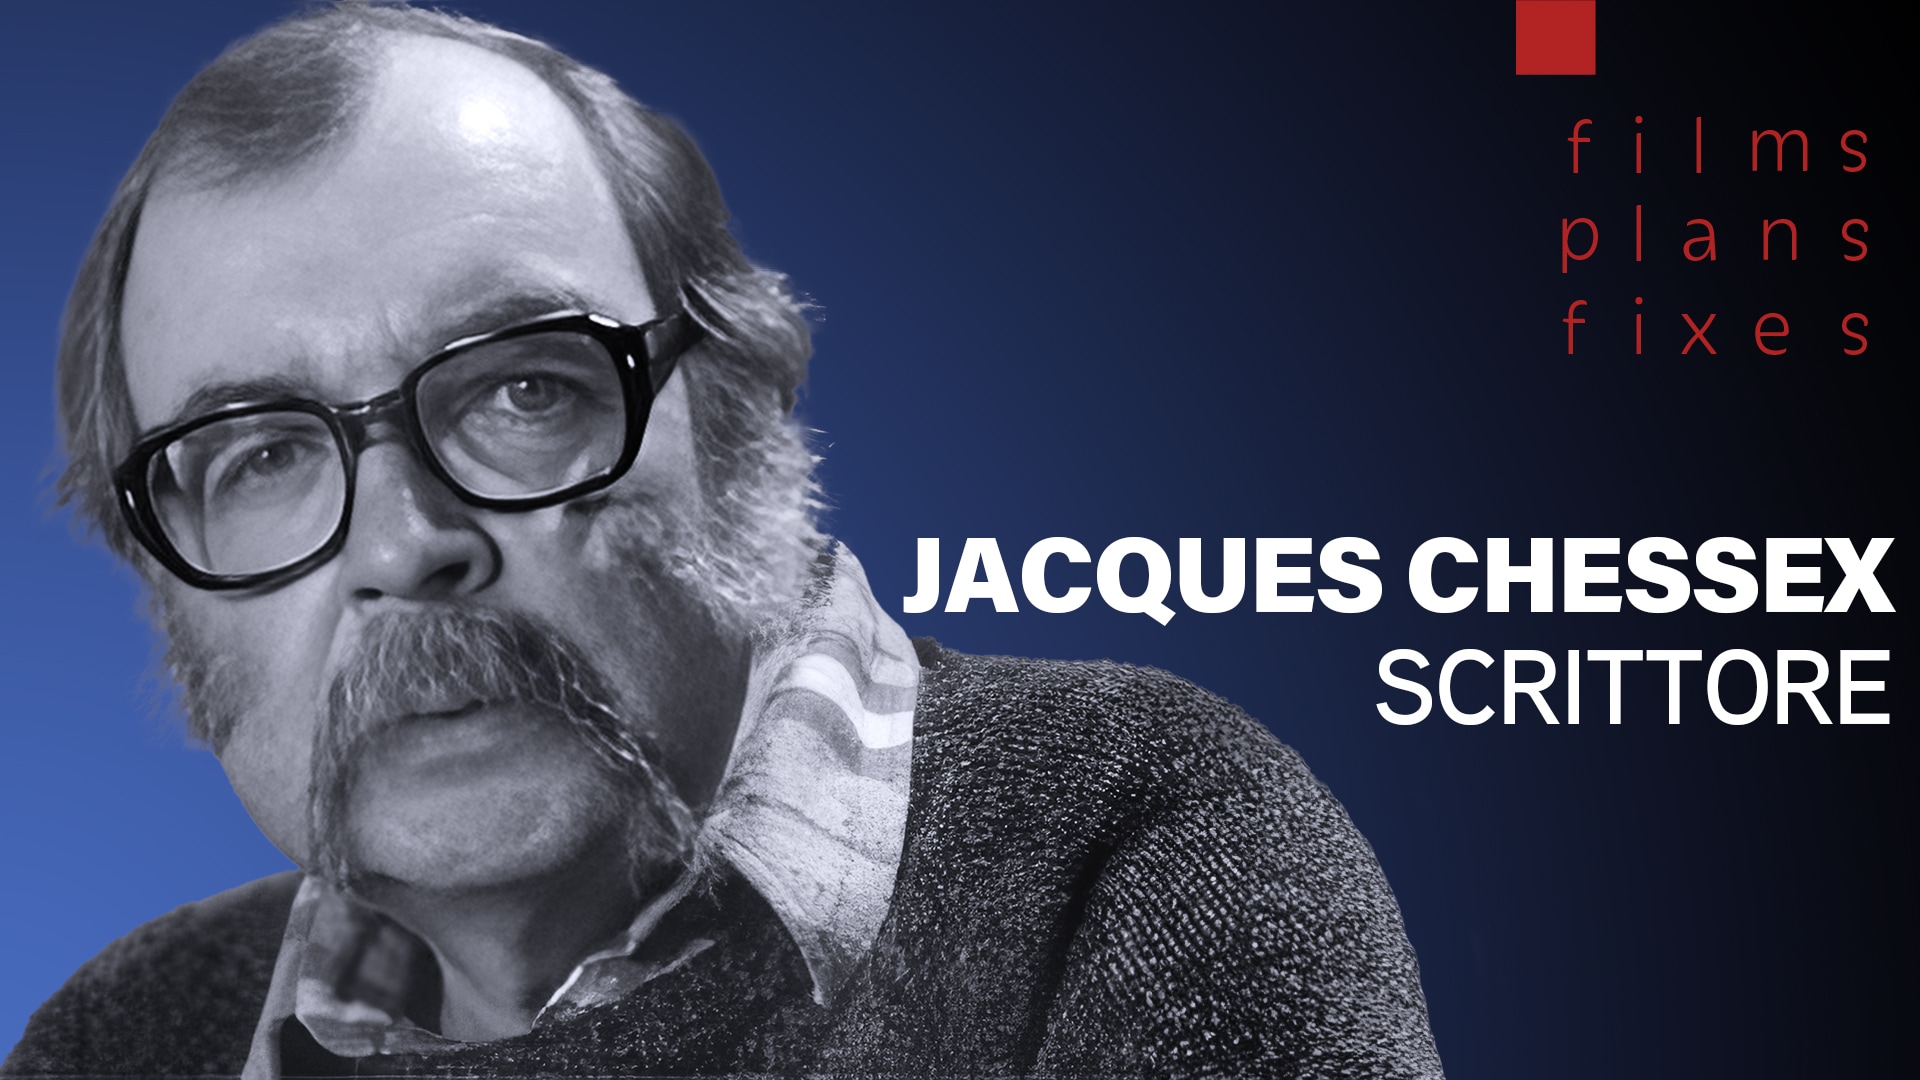 Jacques Chessex, scrittore